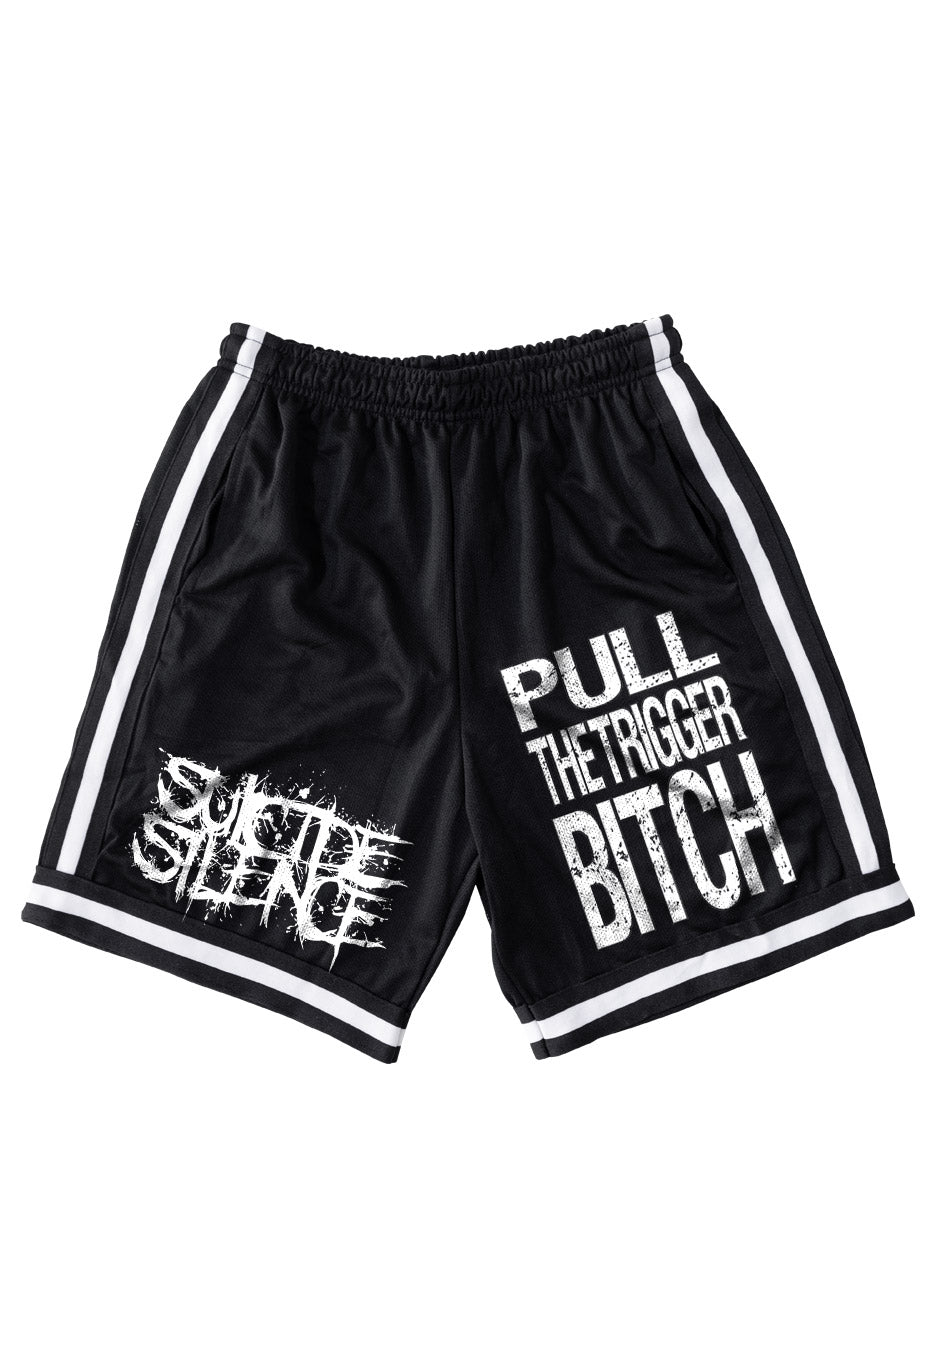 Suicide Silence - Pull The Trigger Striped  - Shorts